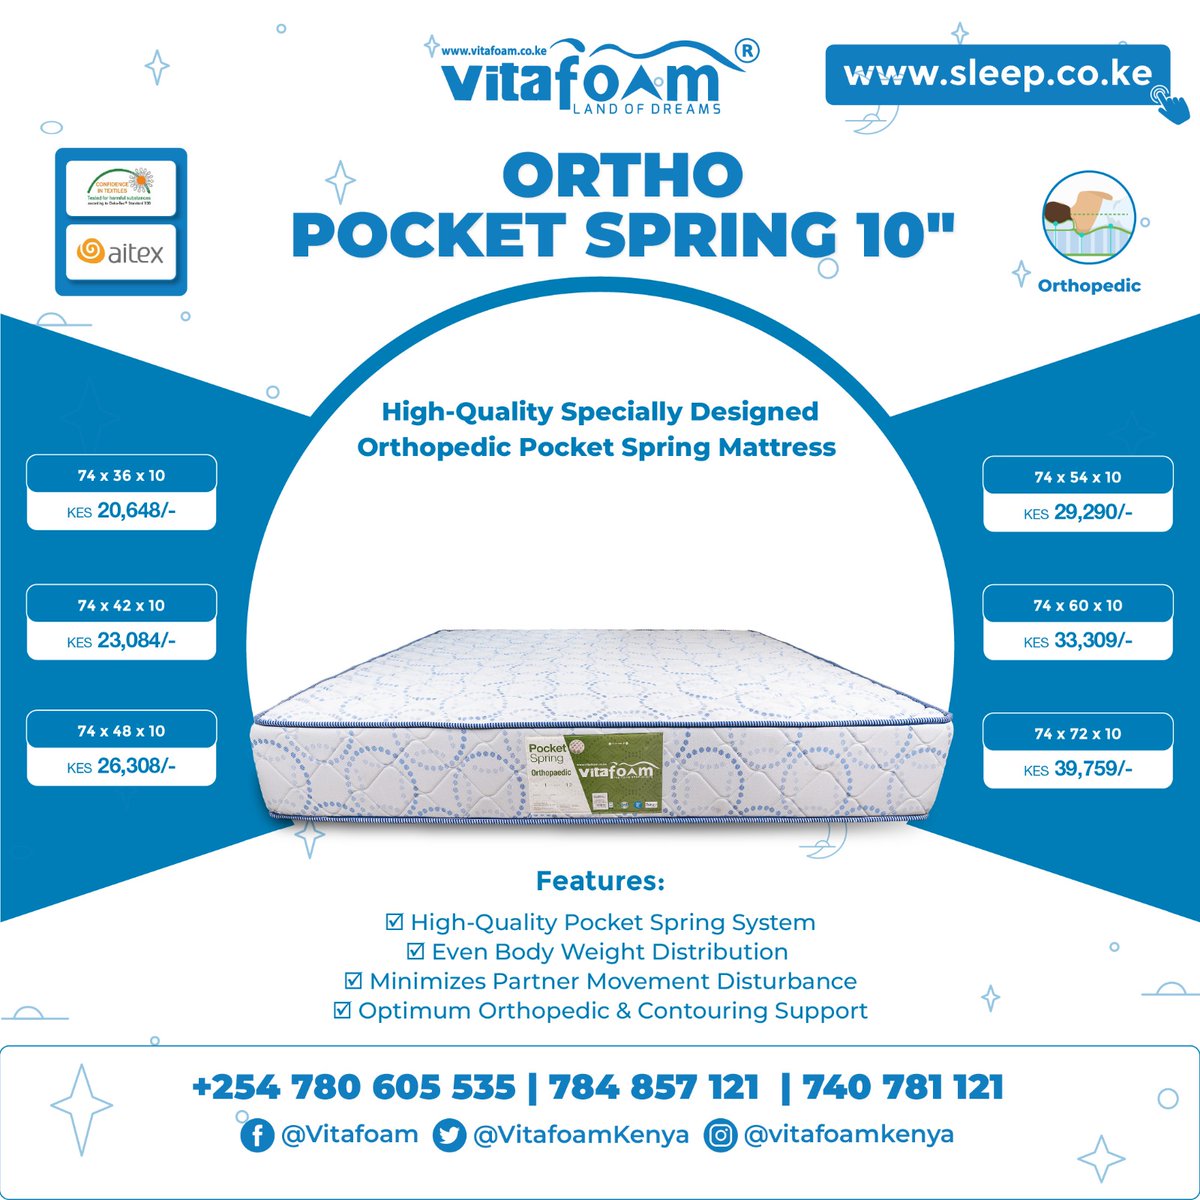 🌟👨‍🔬☁️🌀🛌 Get Higher-Quality Orthopedic Pocket Spring Mattresses At More Affordable Prices Only At Vitafoam® Kenya 🛏️🌀☁️👩‍🔬🌟 ☎ For *Enquiries, *Orders & *Deliveries: +254 780 605 535 | 740 781 121 📍 Sleep Centres: bit.ly/30VqOrf